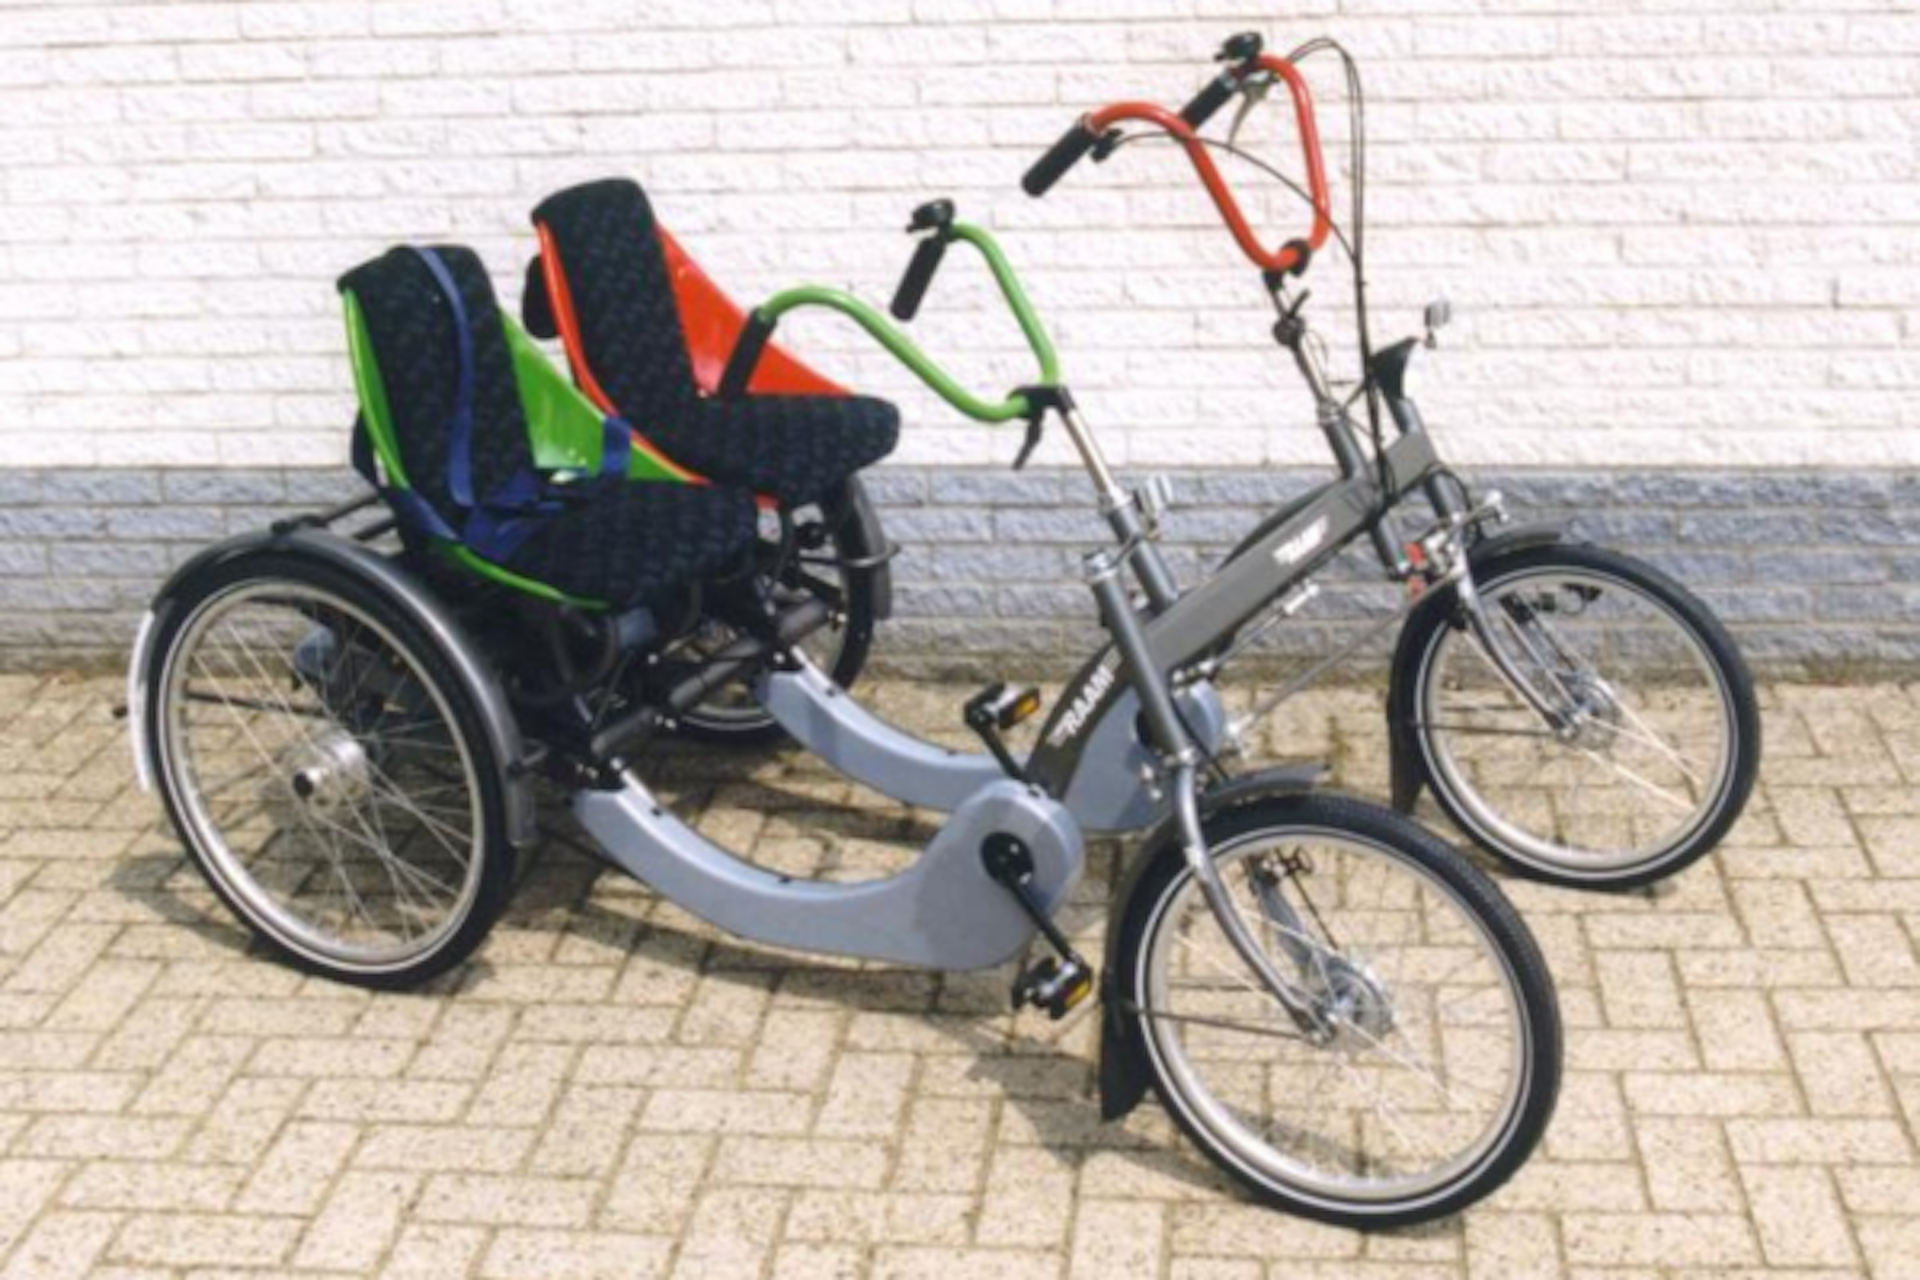 Bicycle two seaters (1999)